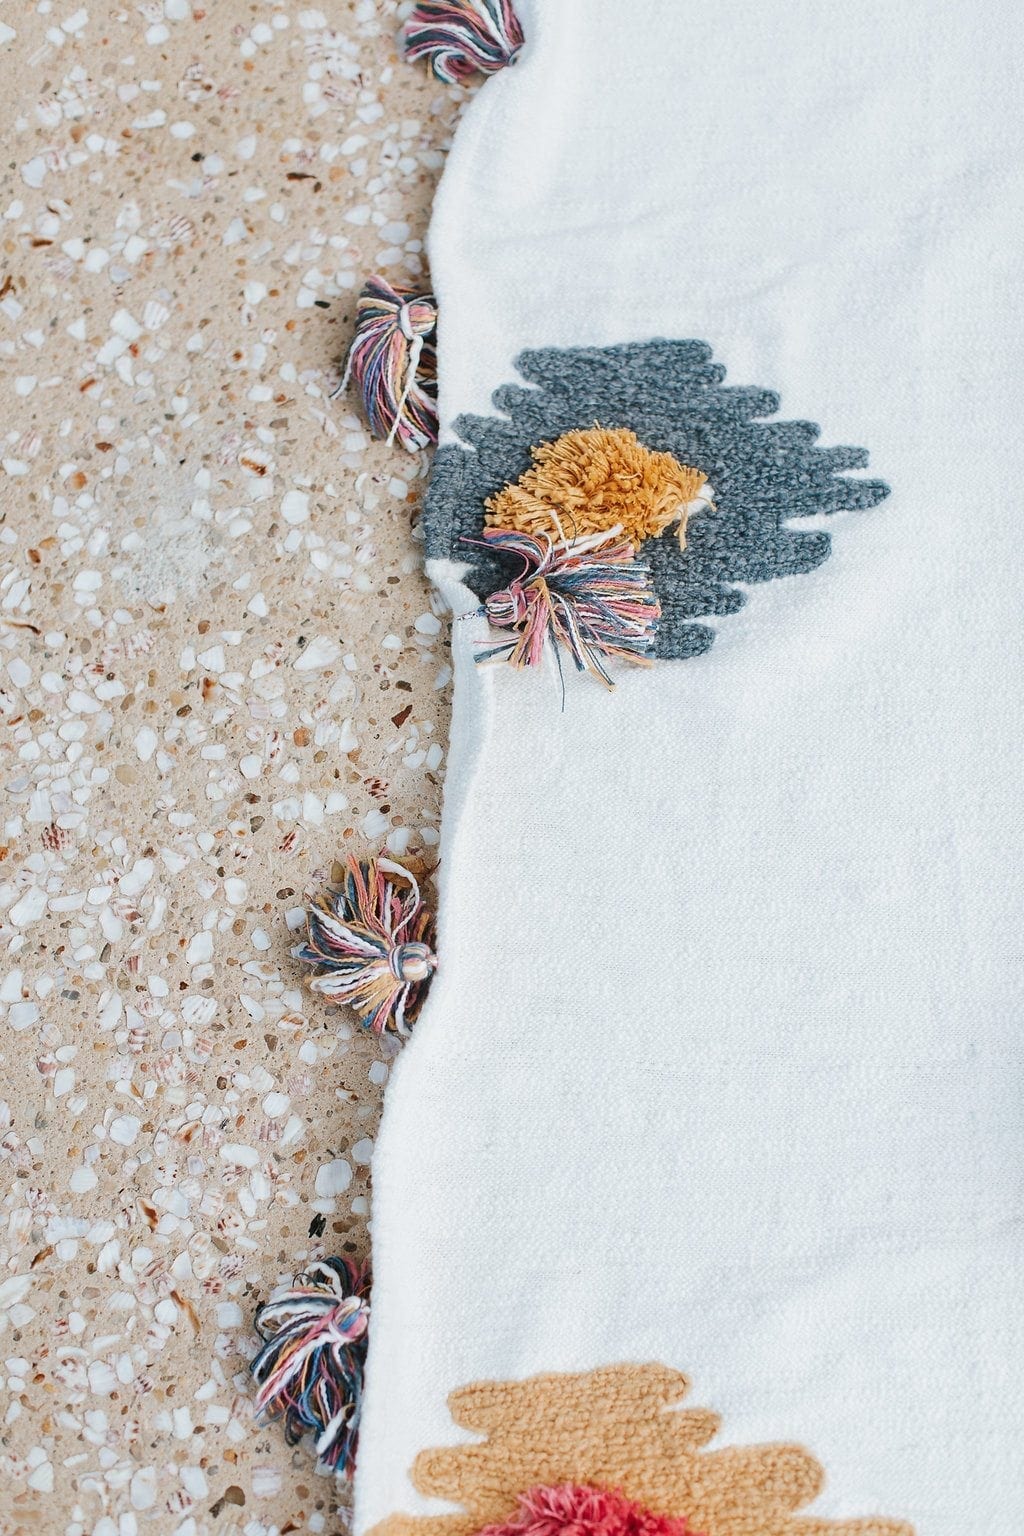 An Anthropologie home decor throw blanket is shown with adorable pom poms and tassels and brightly colored floral embroidery.